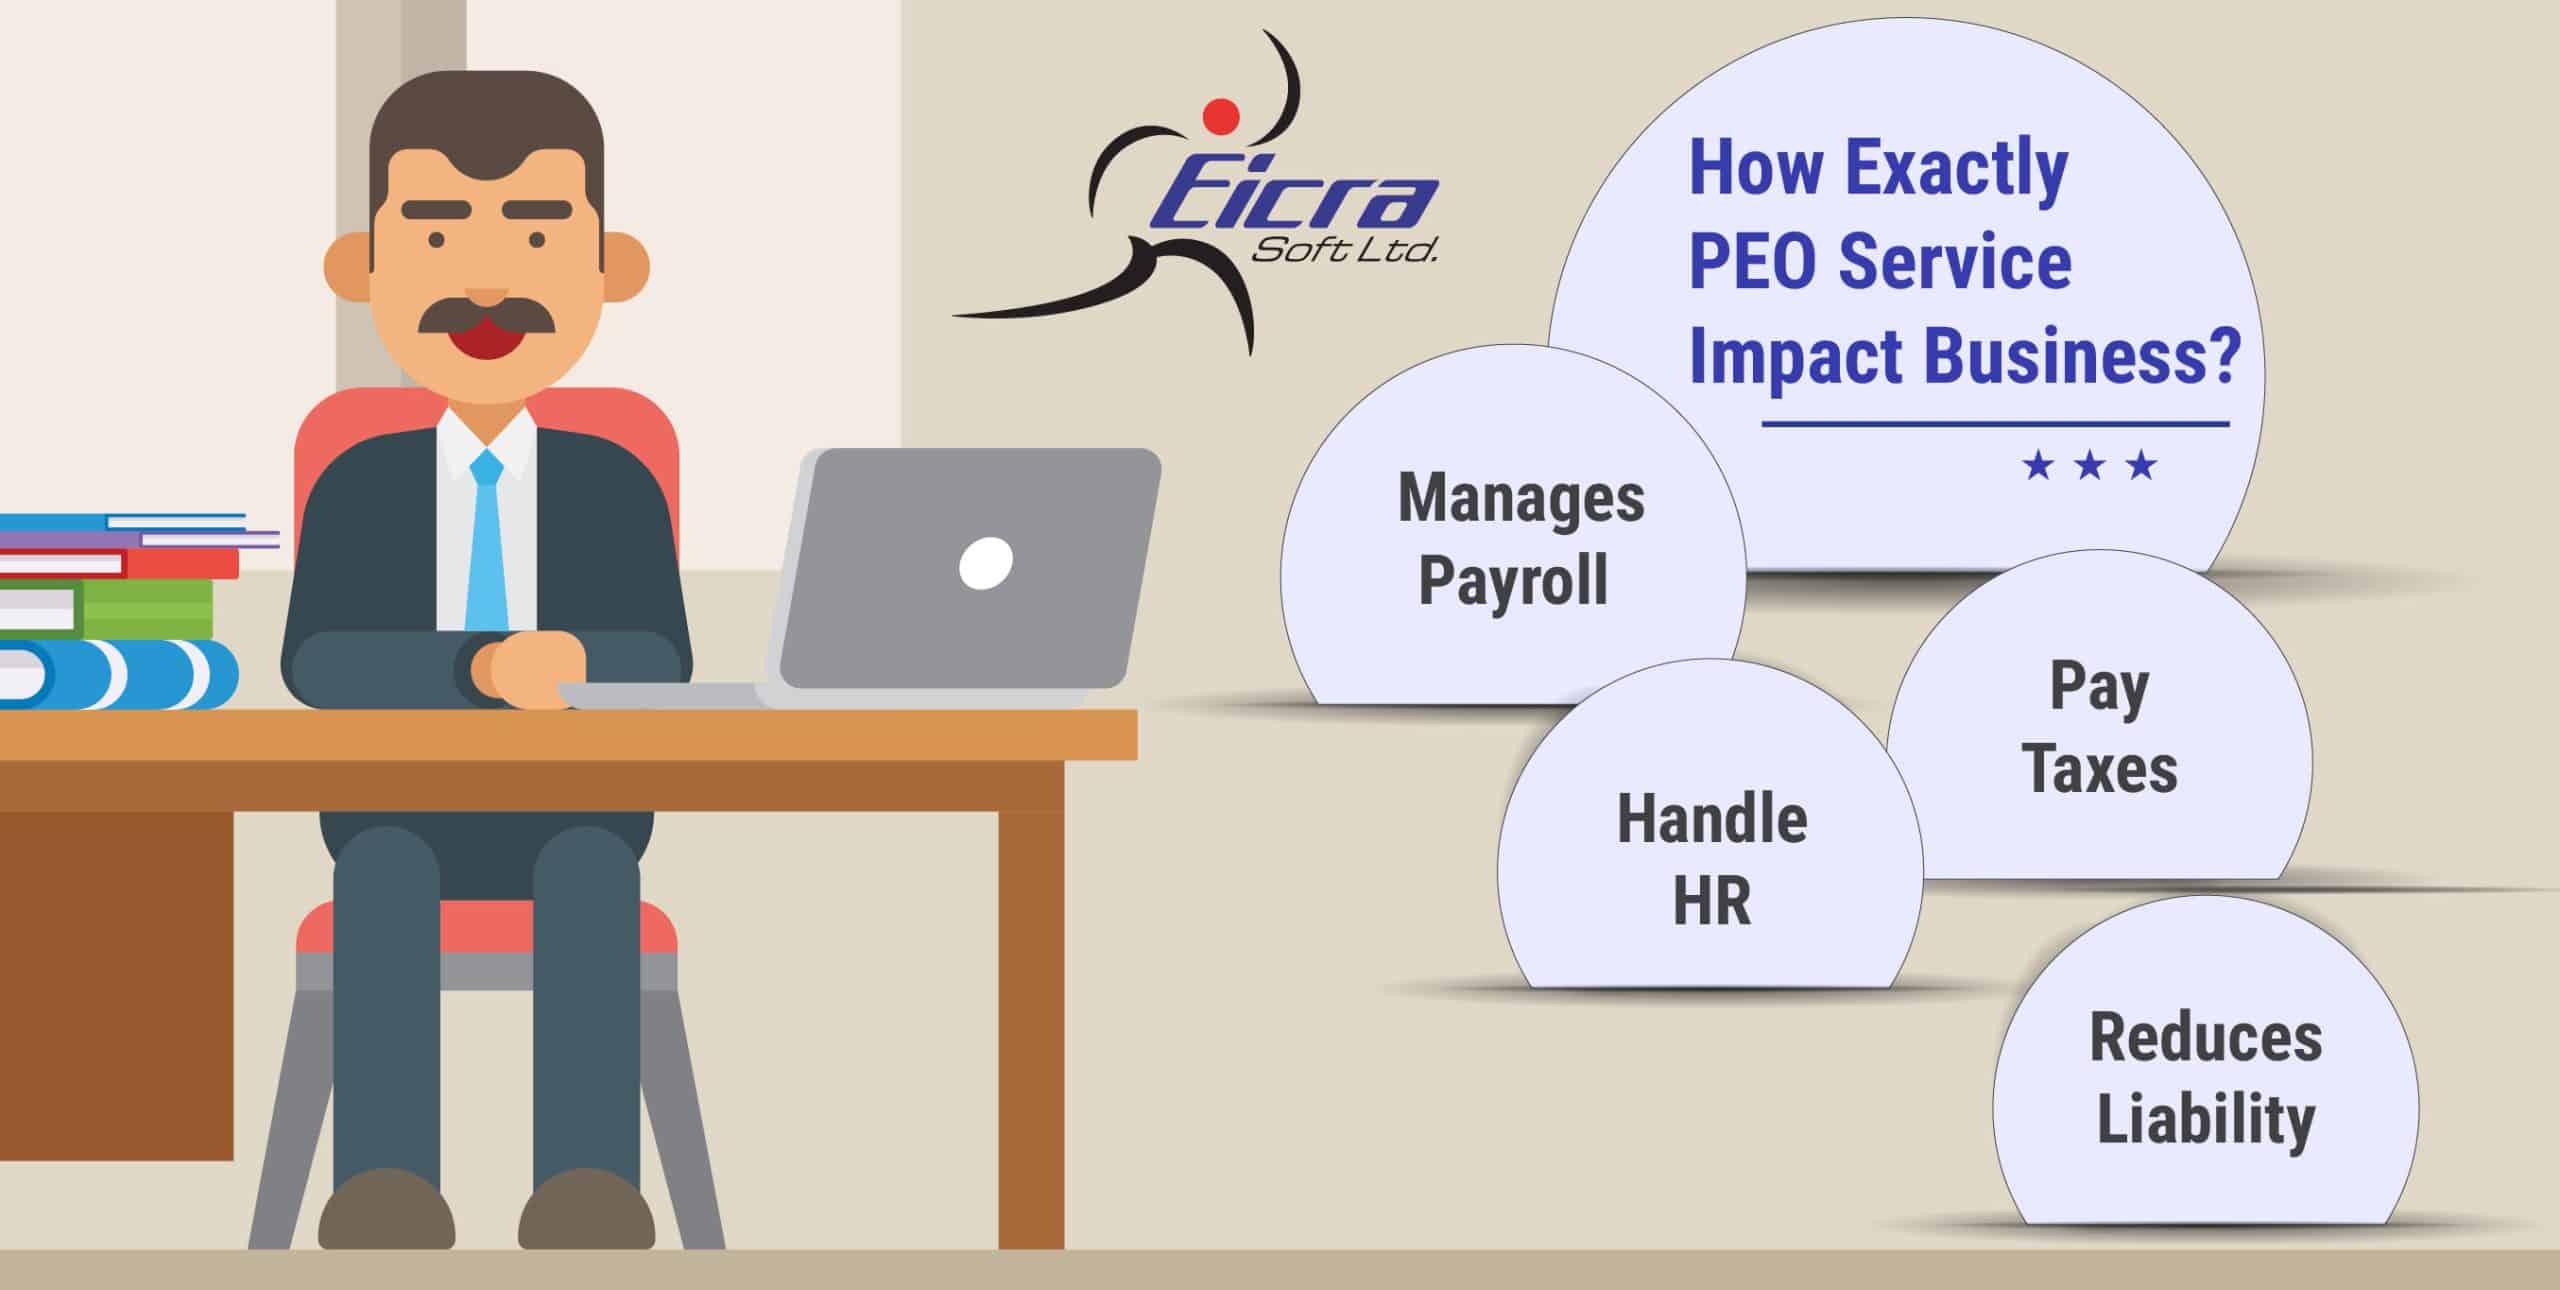 How Exactly PEO Service Impact Business